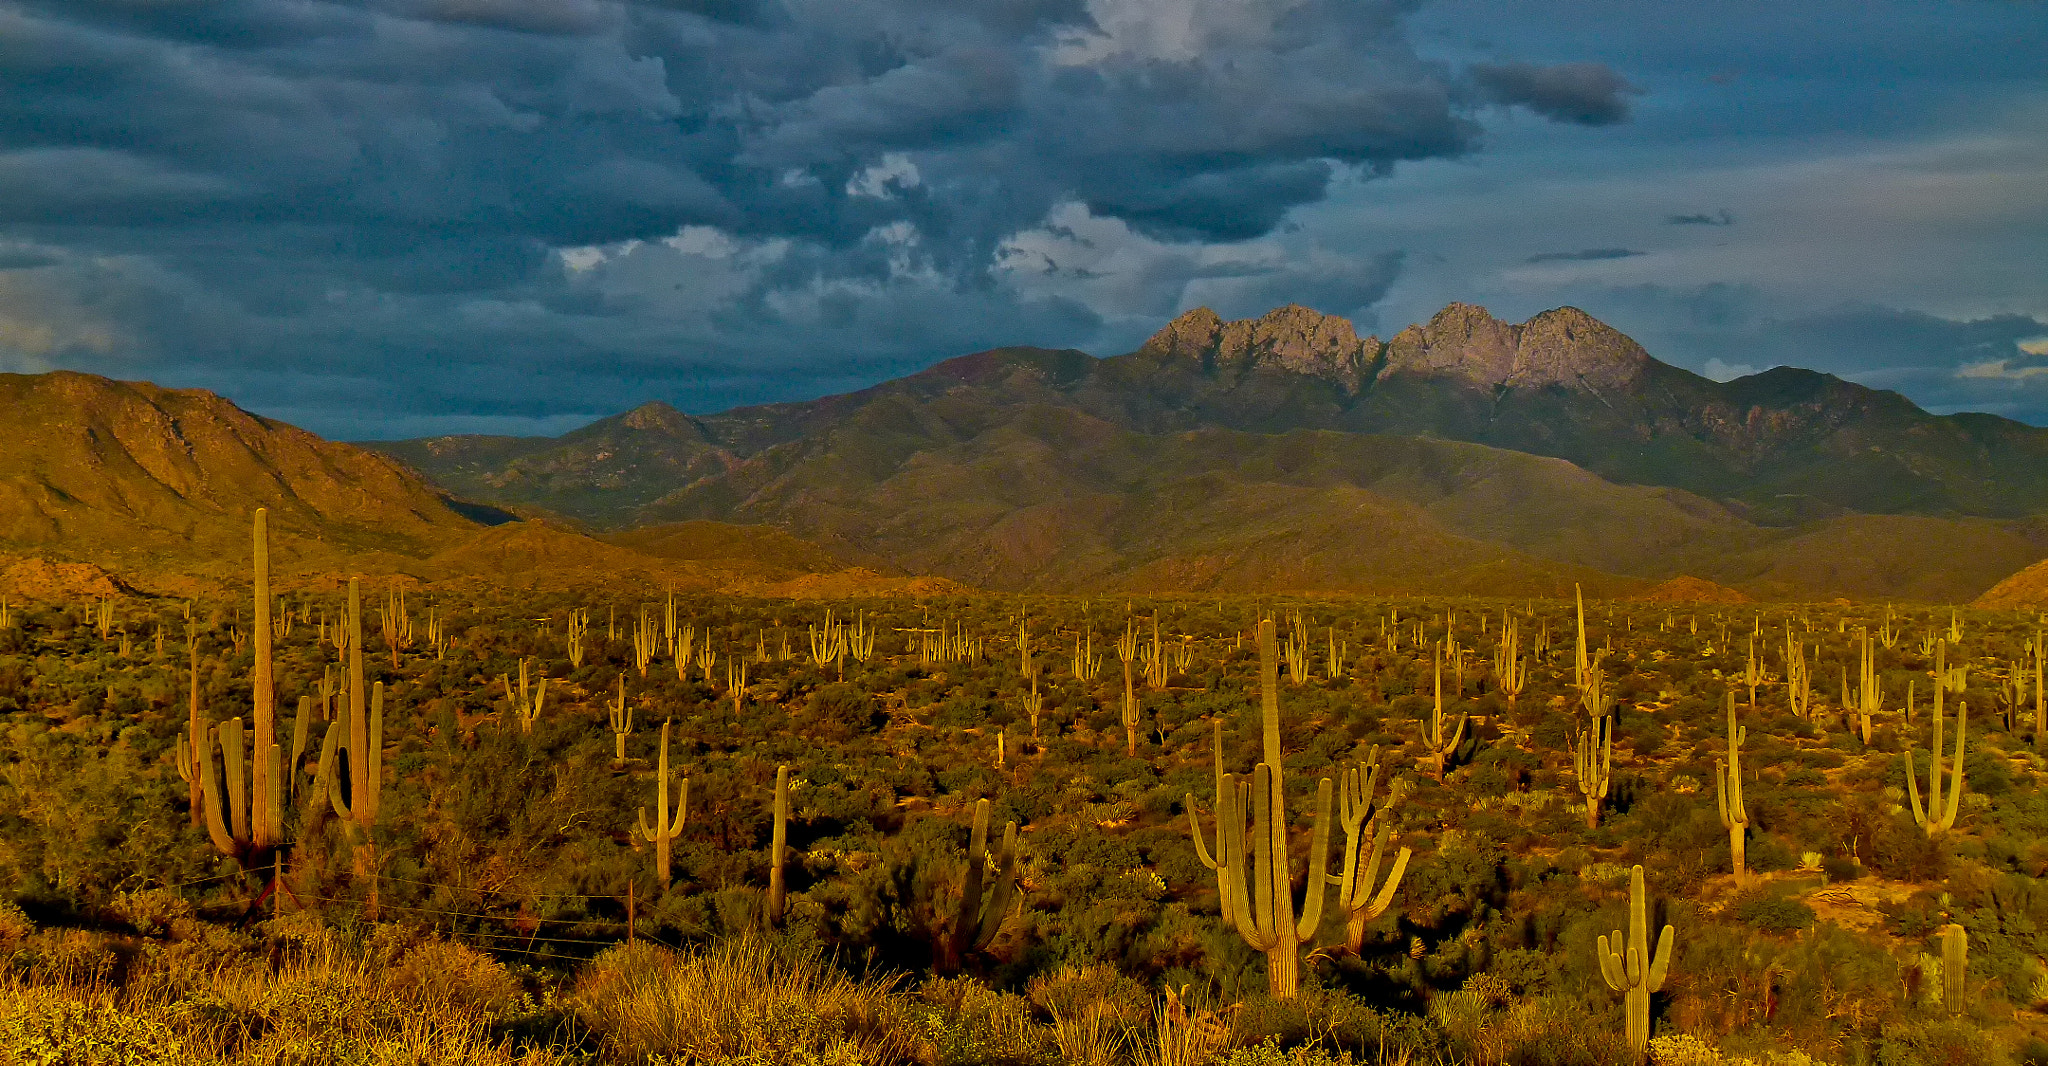 FOUR PEAKS STORMY SUNSET